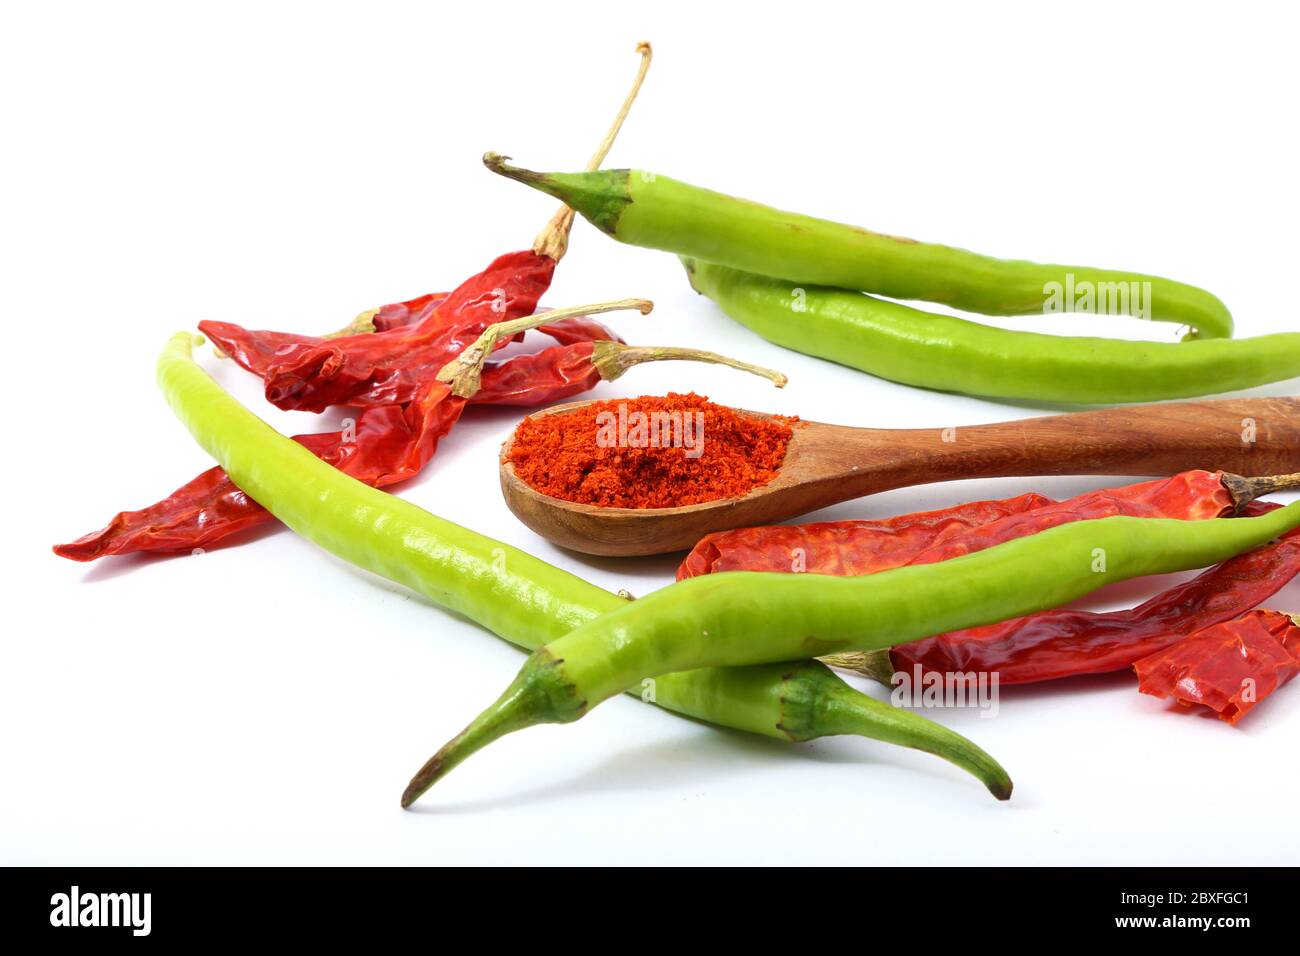 Red chili powder with red green chilies on white background Stock Photo